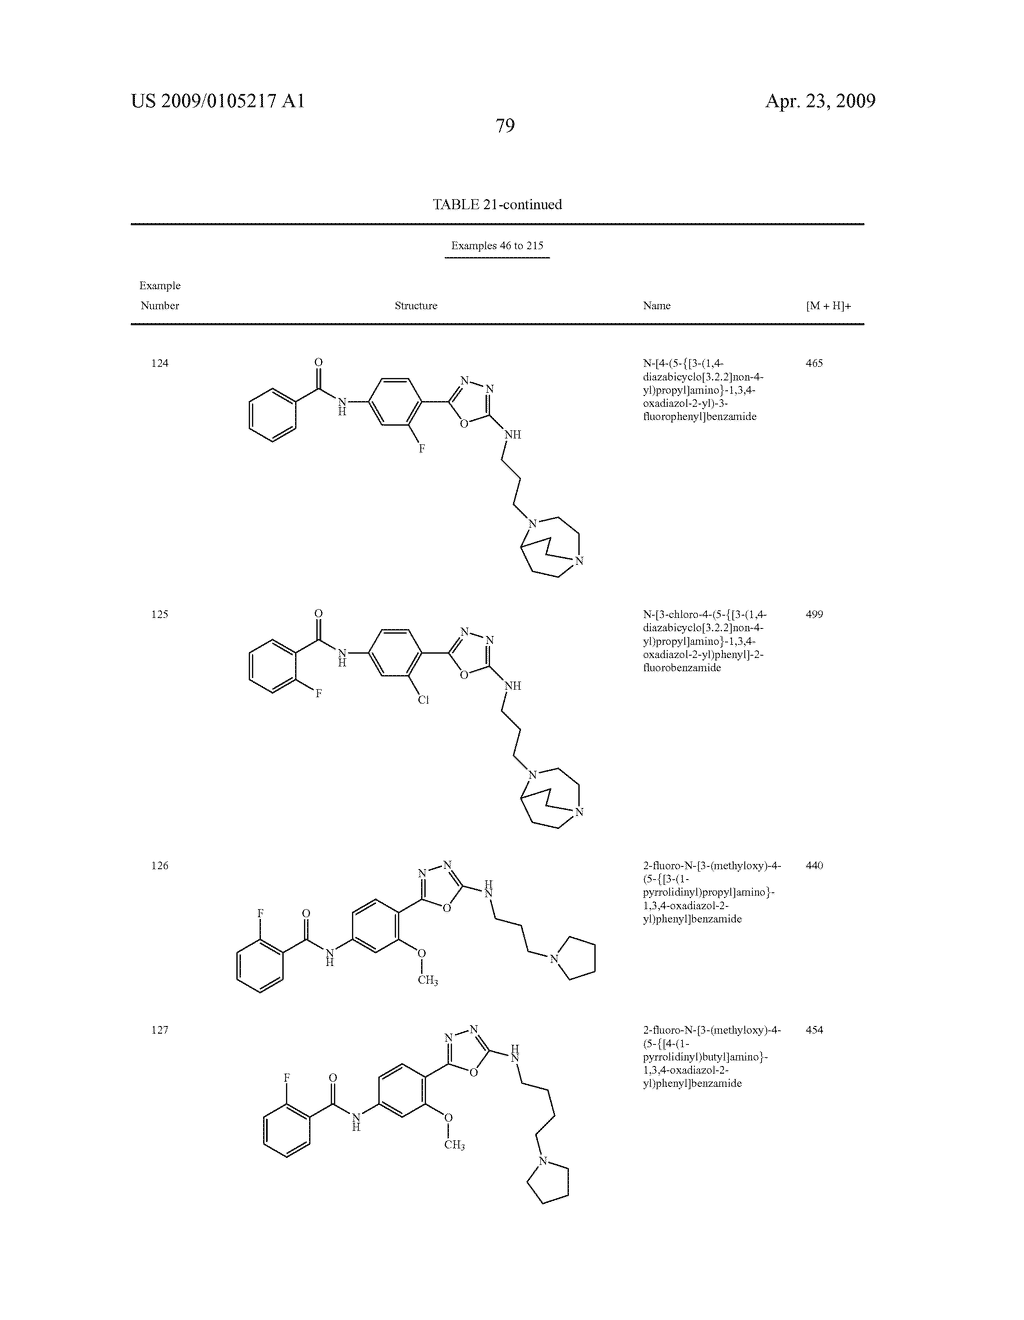 2-PHENYL-5-AMINO-1,3,4-OXADIAZOLES AND THEIR USE AS NICOTINIC ACETYLCHOLINE RECEPTOR LIGANDS - diagram, schematic, and image 80